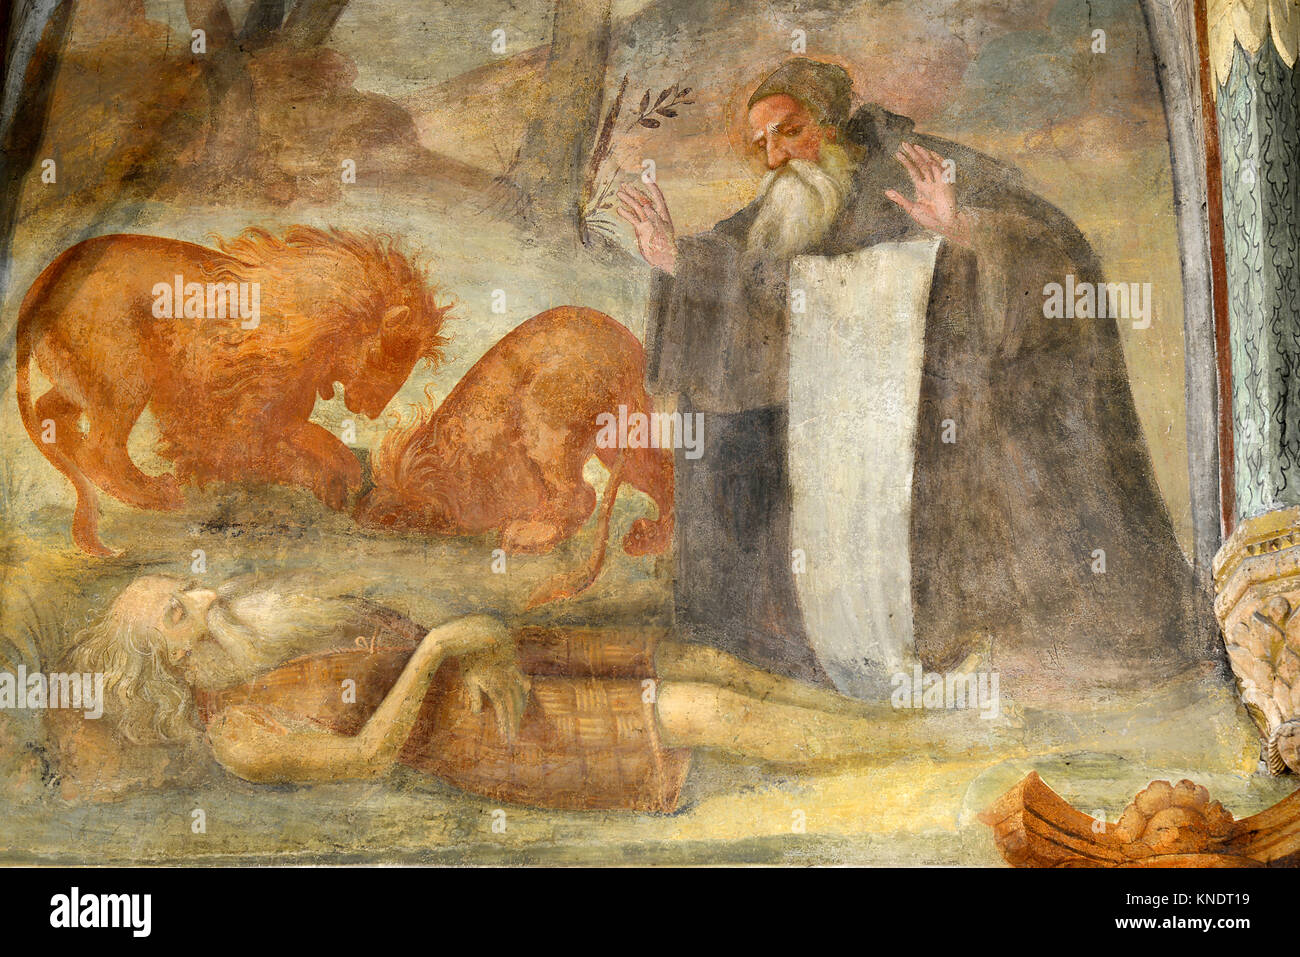 Italy S.Daniele del Friuli Church of S. Antonio Abate. Cycle of frescoes from the 15th century by Pellegrino da San Daniele. On the left of the apse narrating the burial of St. Peter. Stock Photo